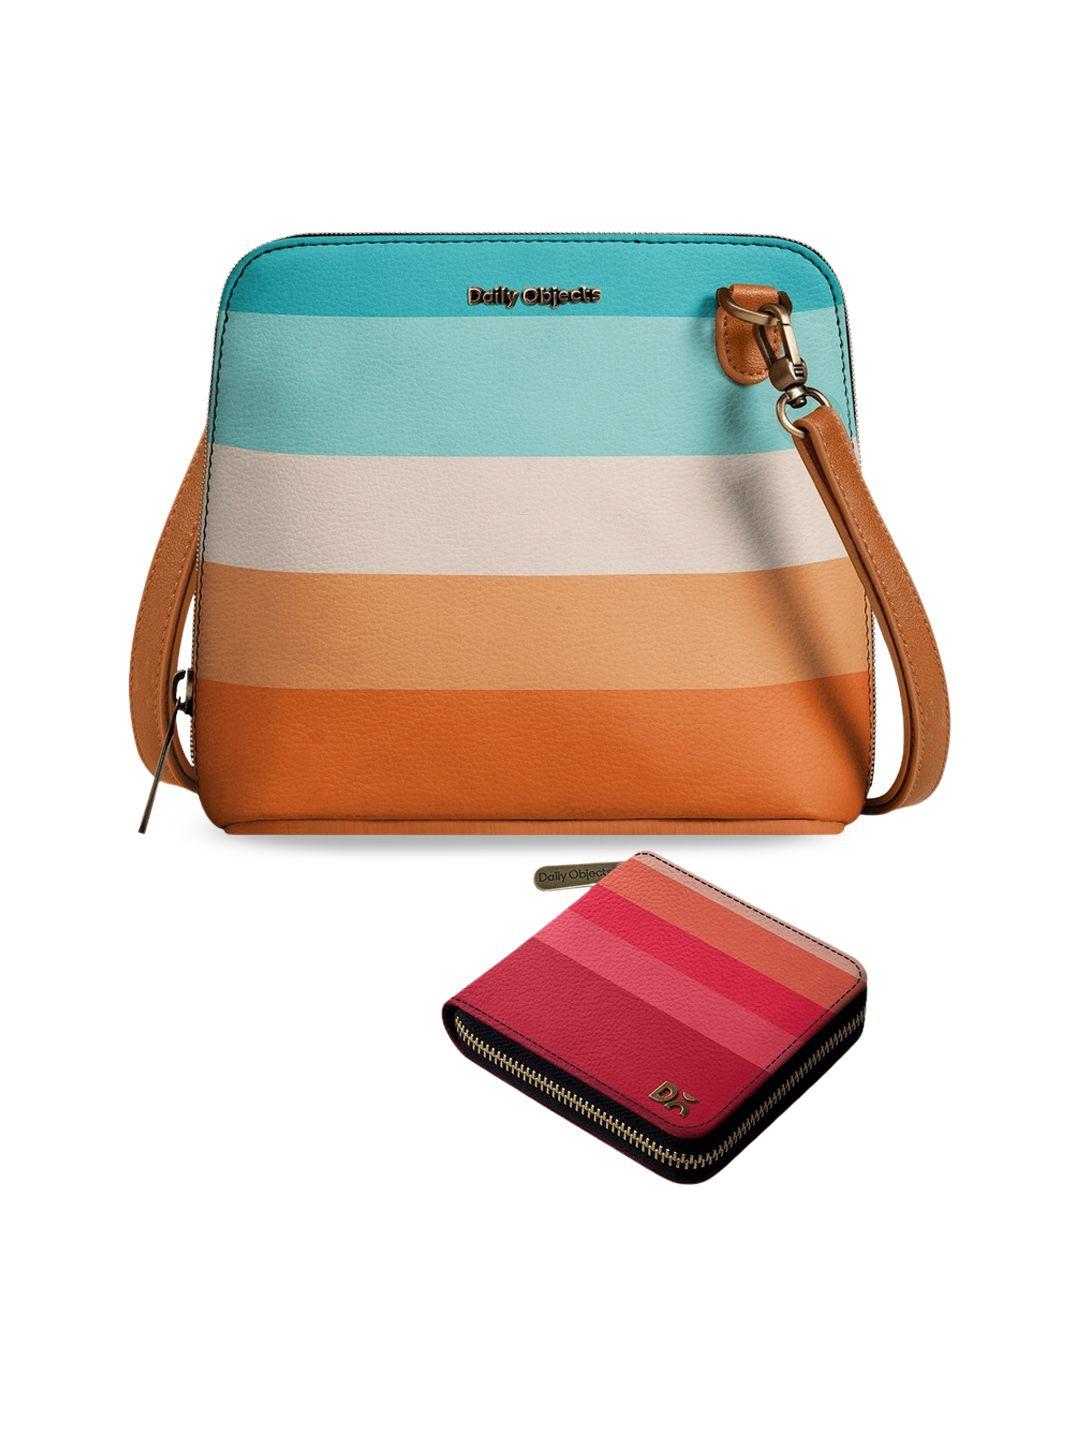 dailyobjects multicoloured striped leather structured sling bag with zip wallet